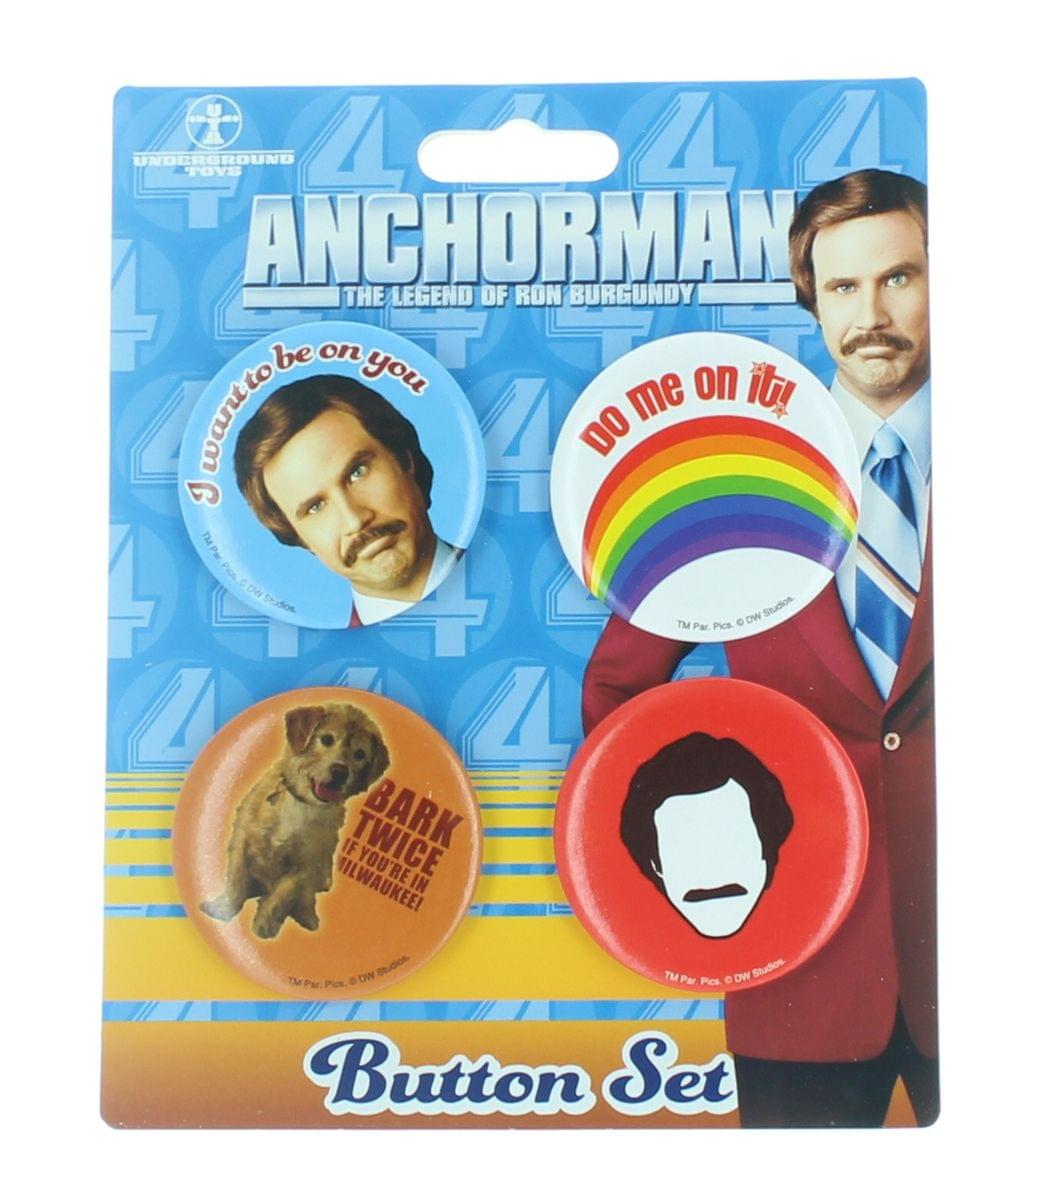 Anchorman: The Legend of Ron Burgundy 4-Piece Button Set "I Want To Be On You"